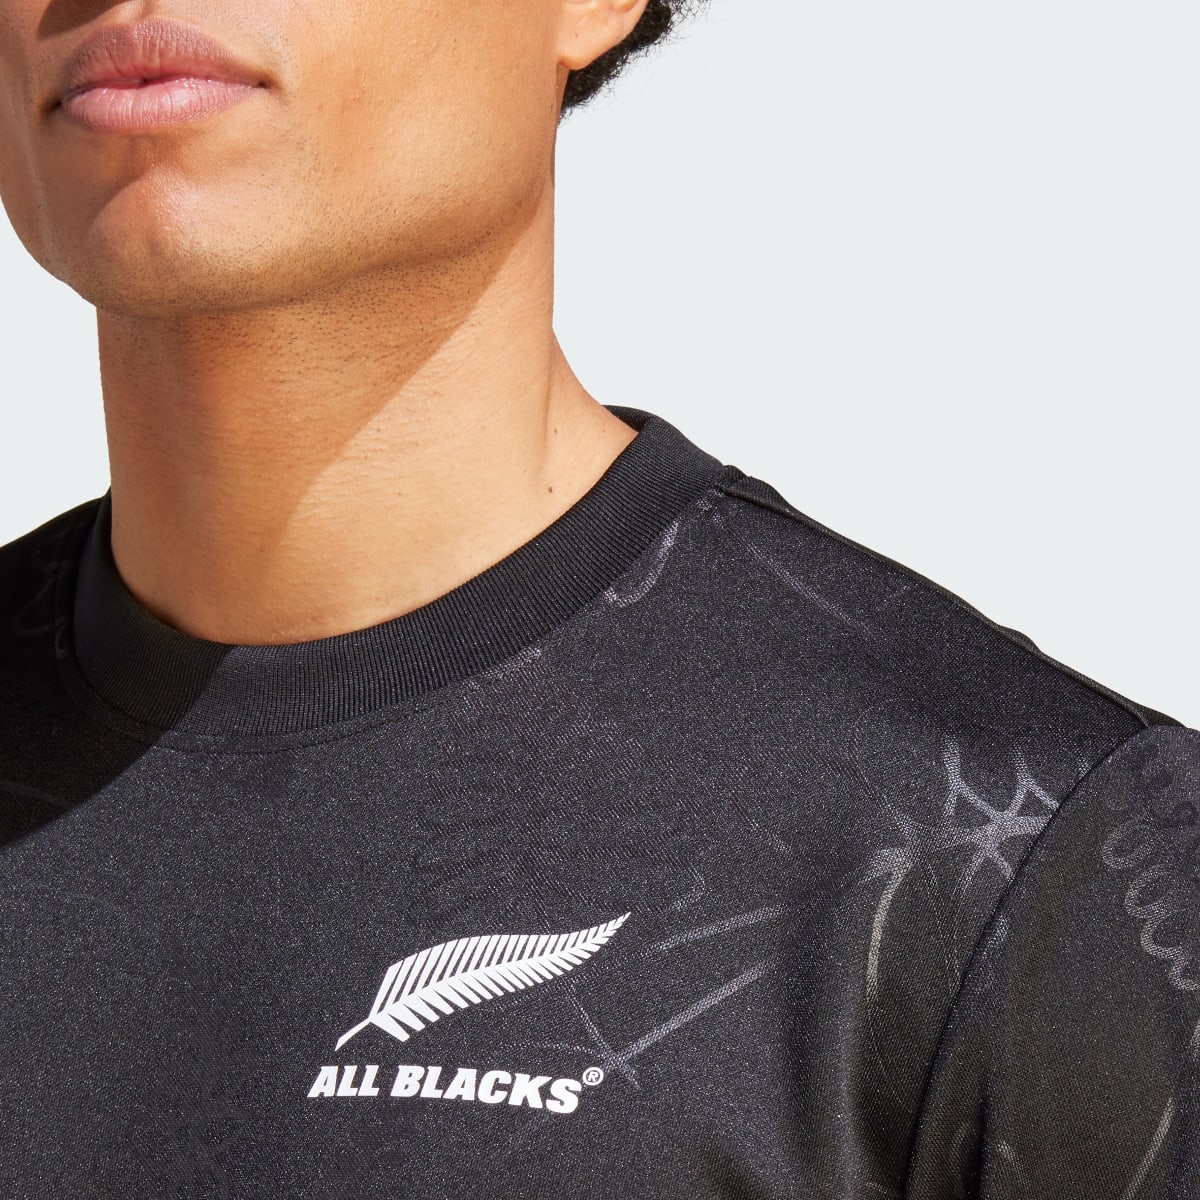 Adidas T-shirt de rugby supporters All Blacks. 7